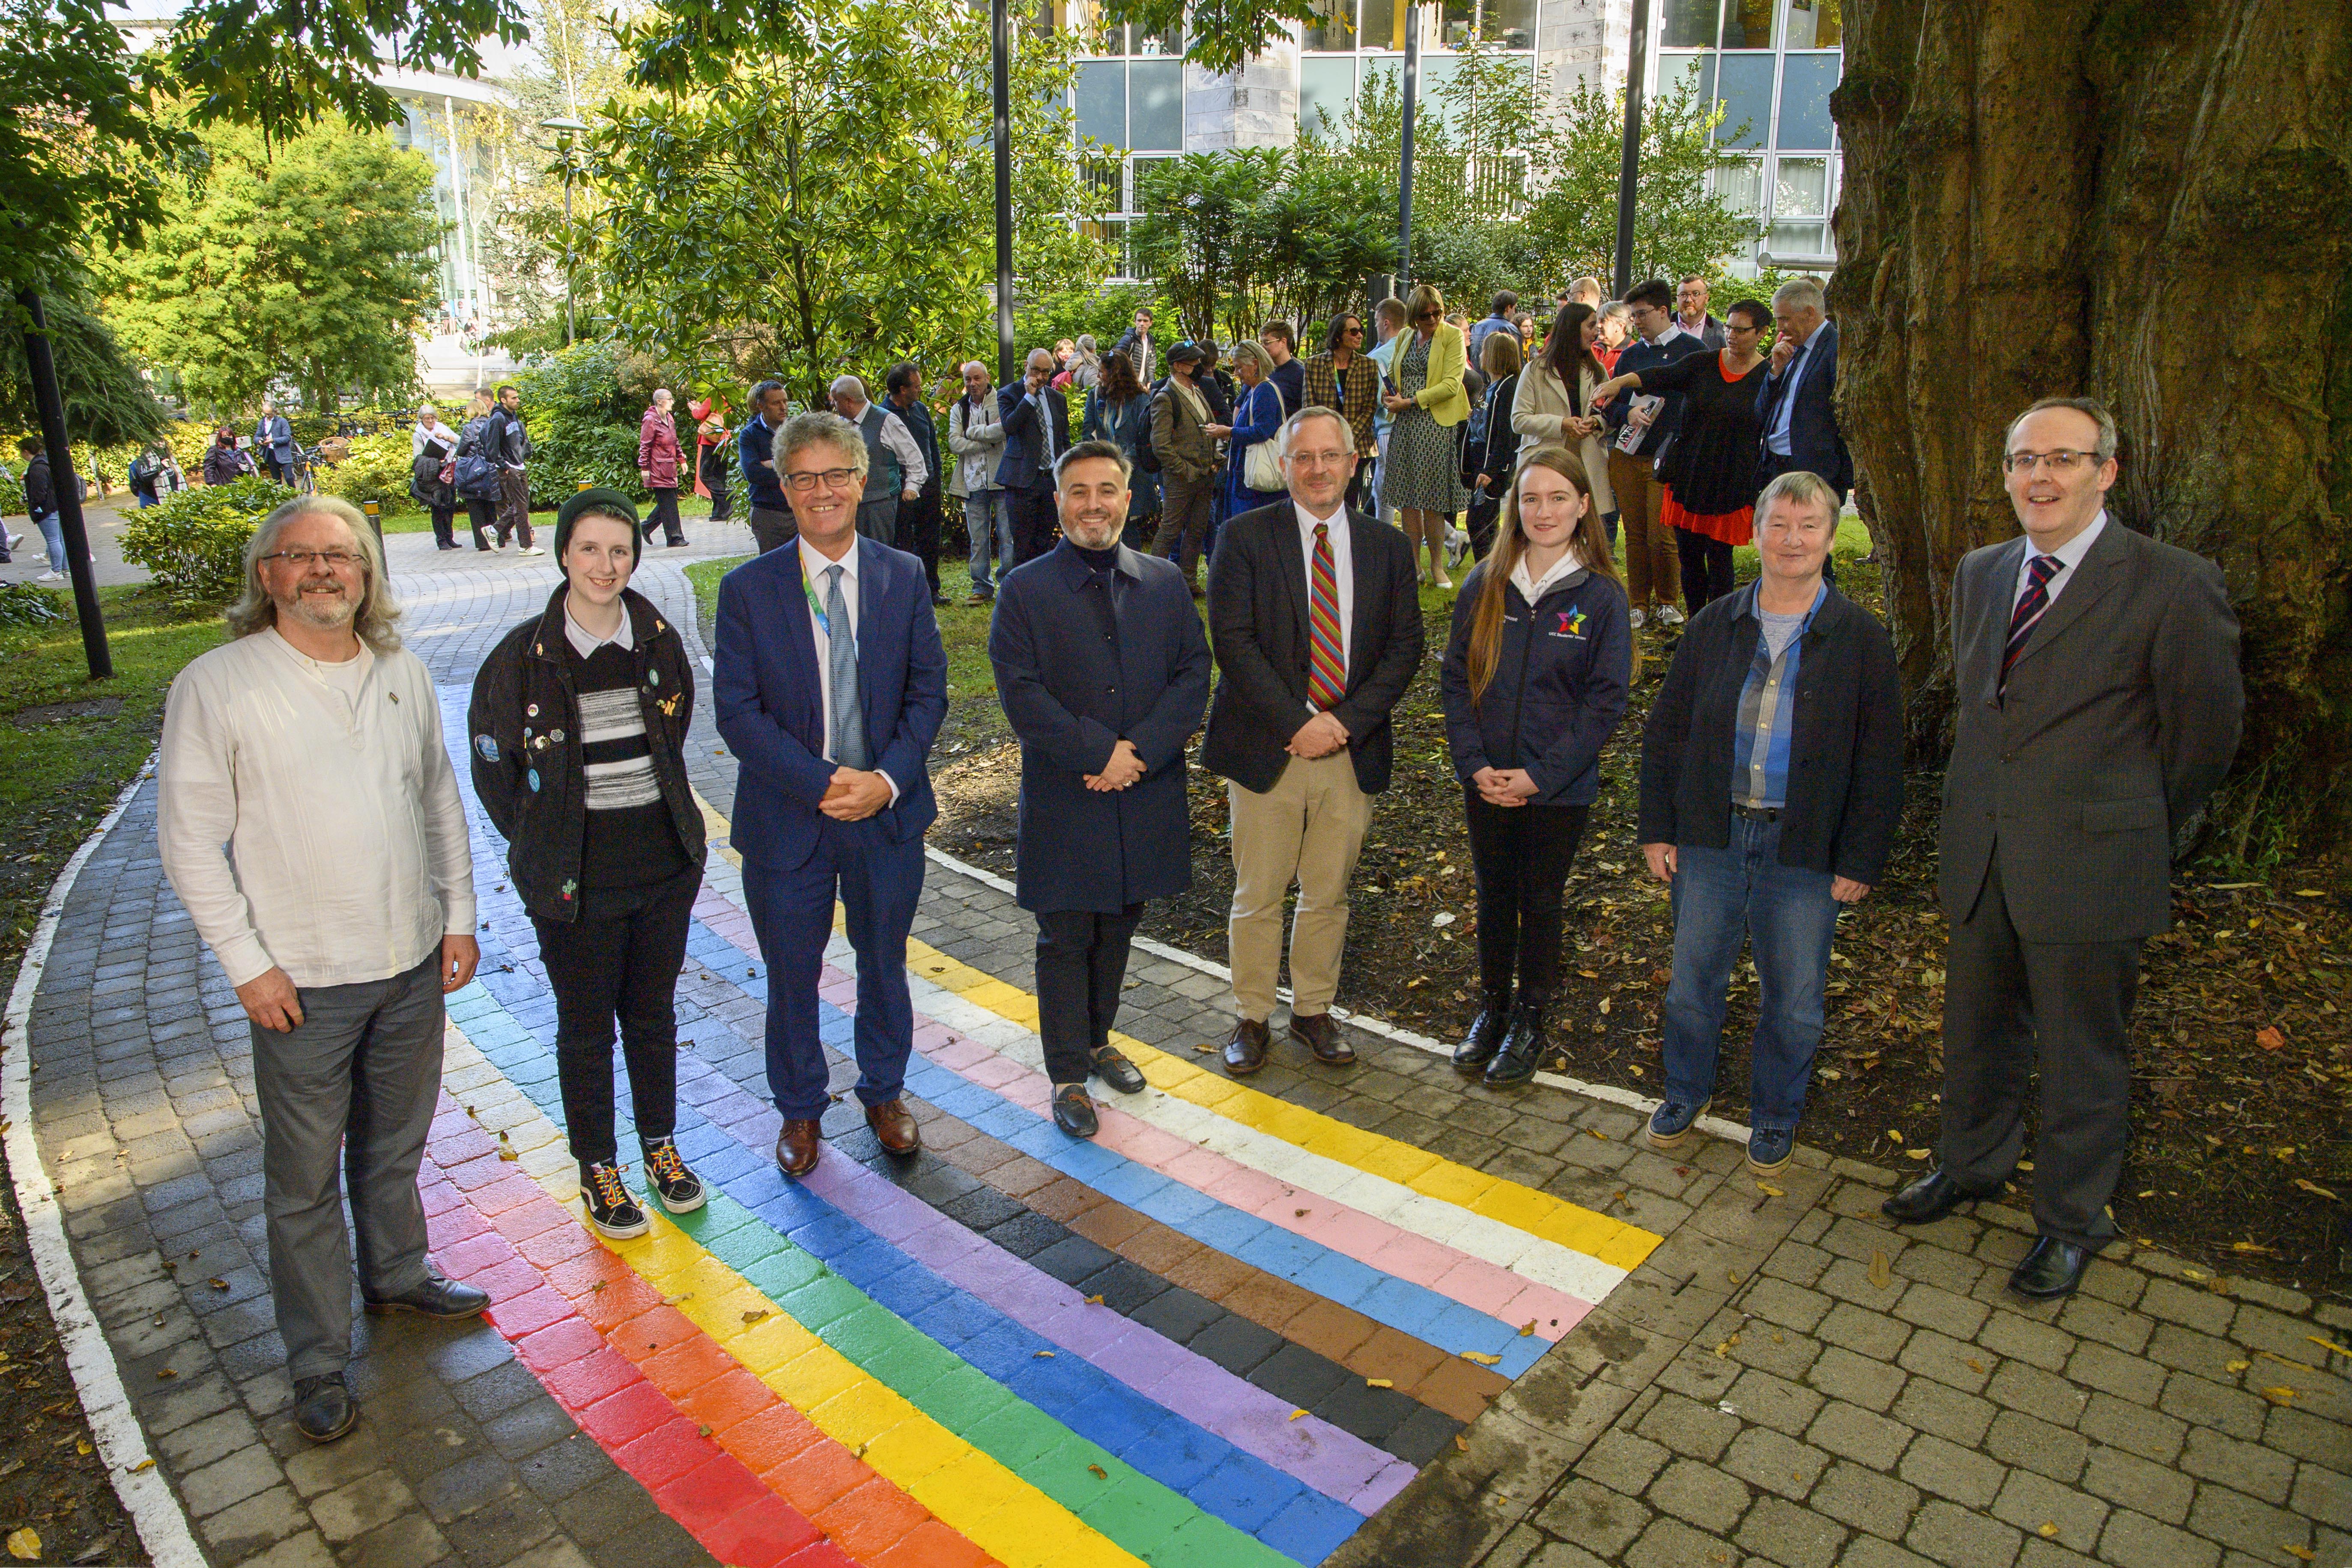 UCC unveils rainbow walkway to mark National Coming Out Day